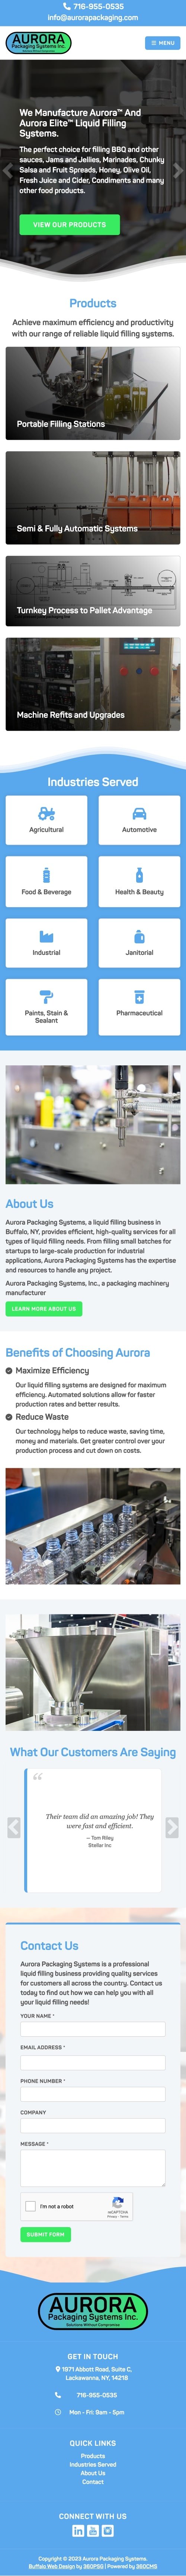 Aurora Packaging Systems Website - Mobile